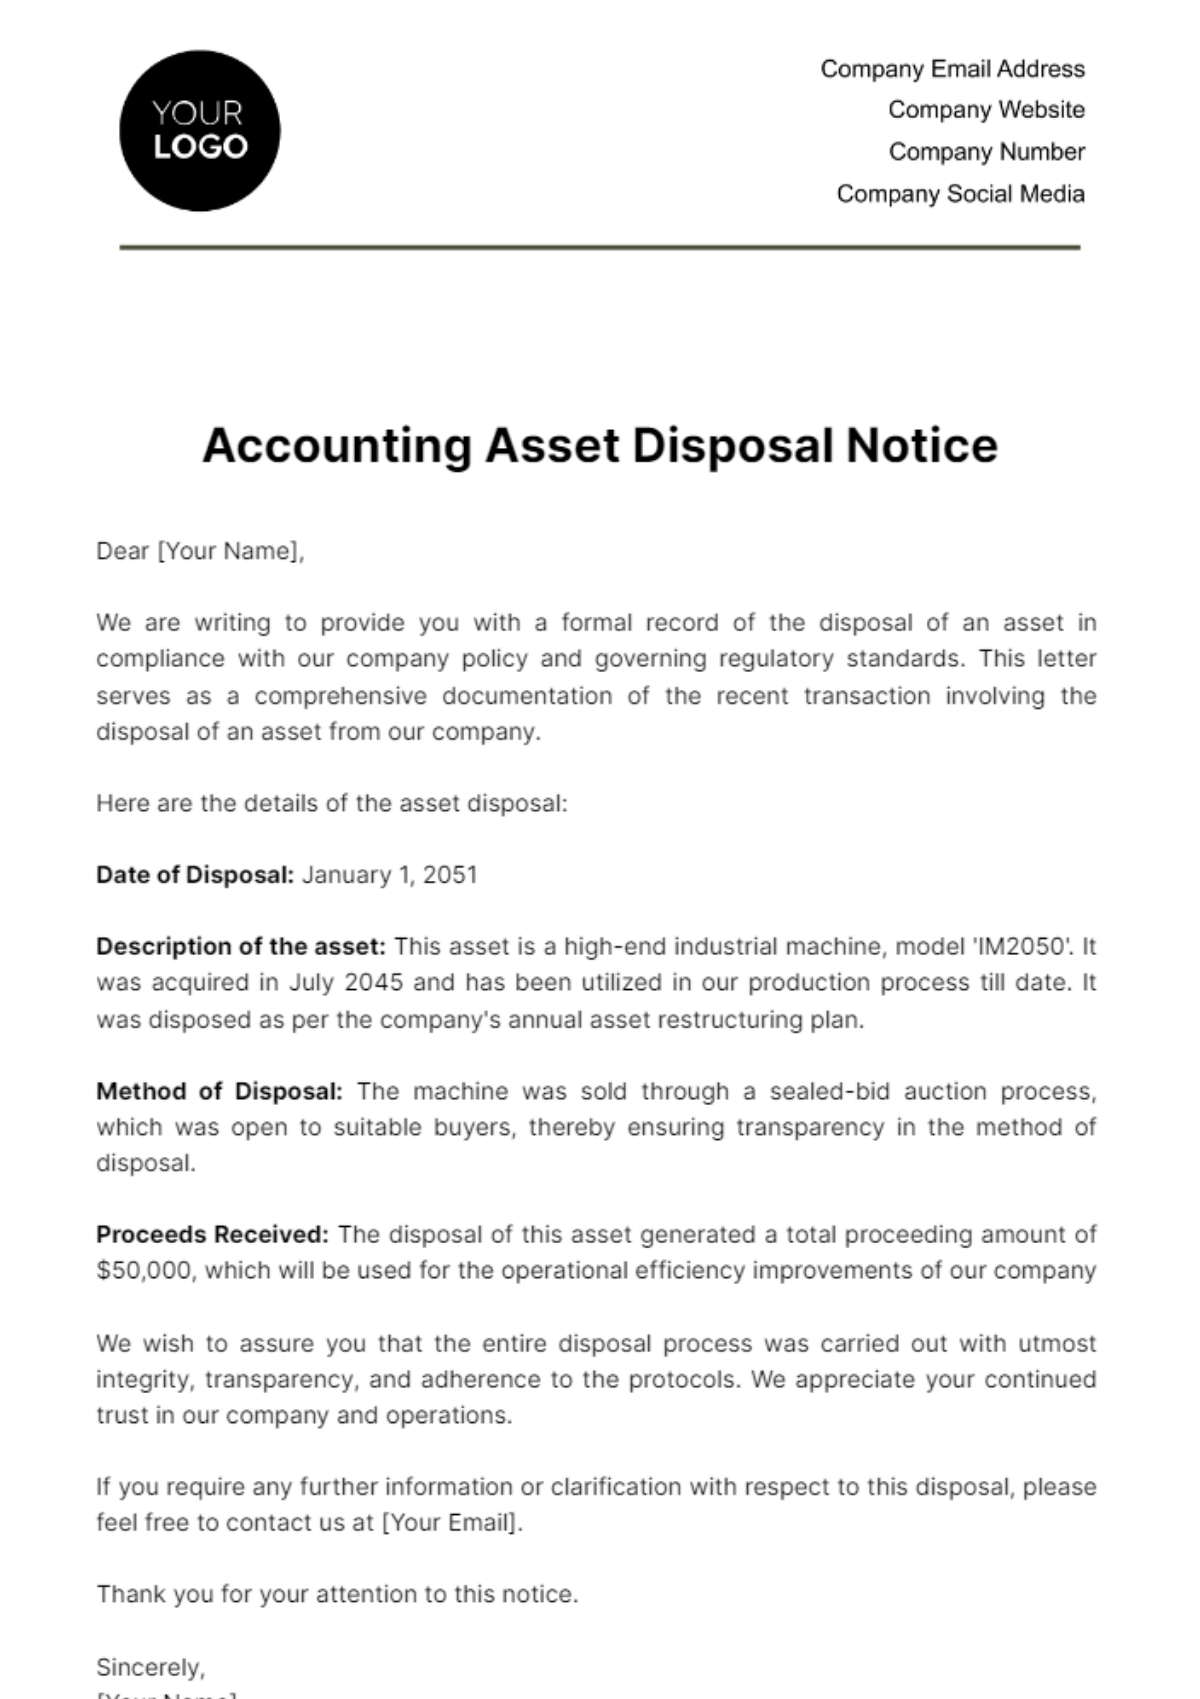 Accounting Asset Disposal Notice Template